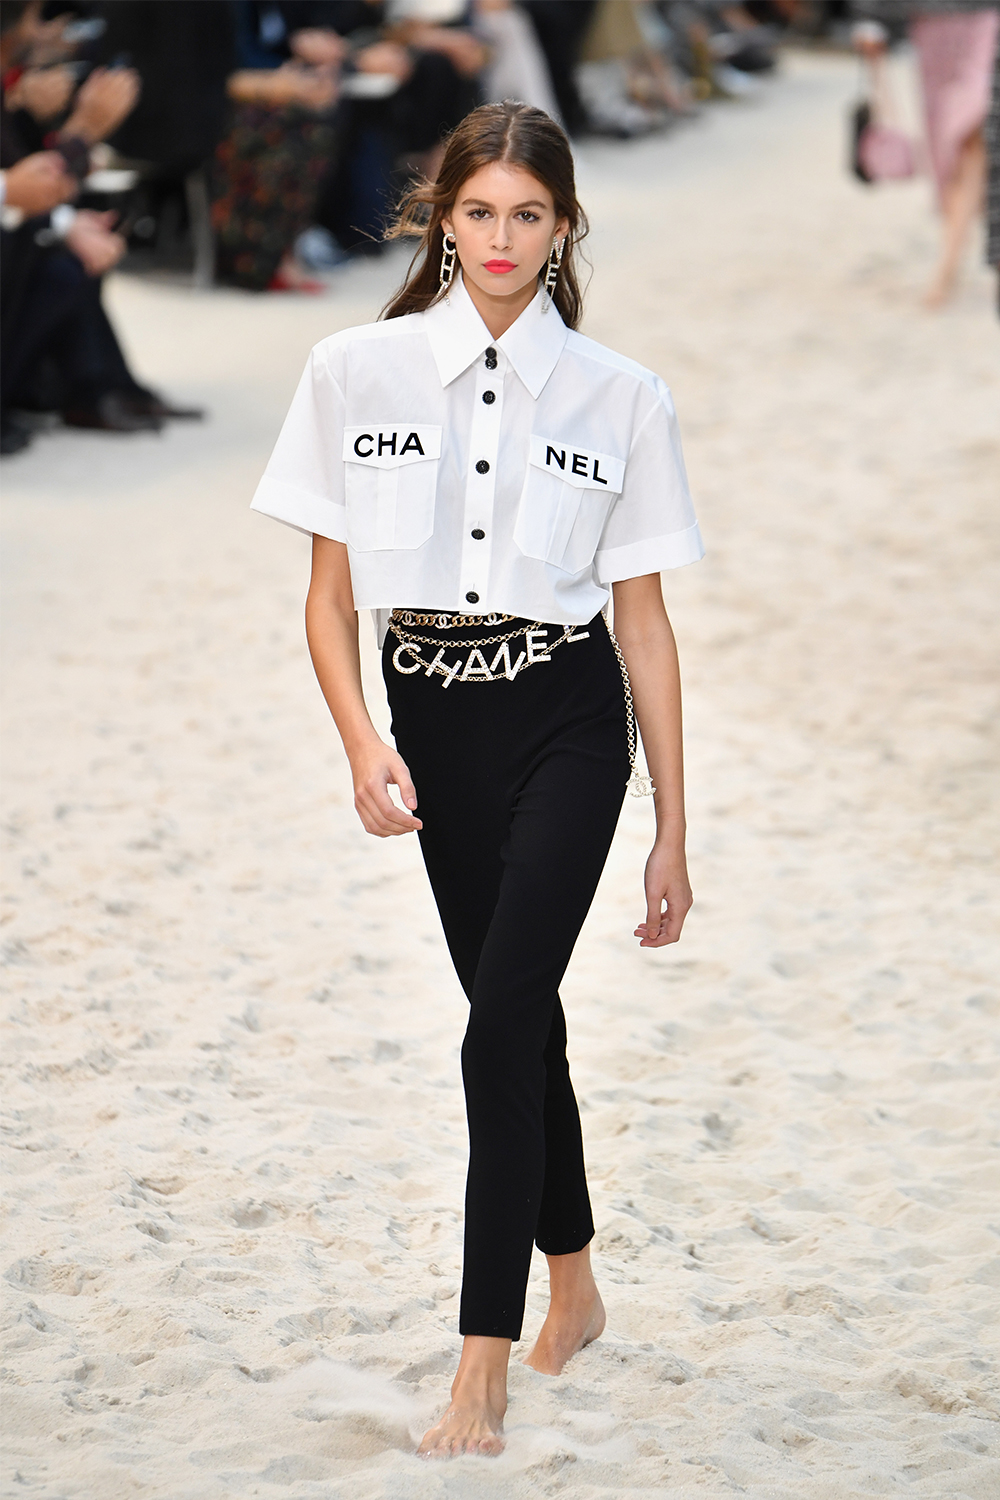 10 Things You Didn't Know About Chanel